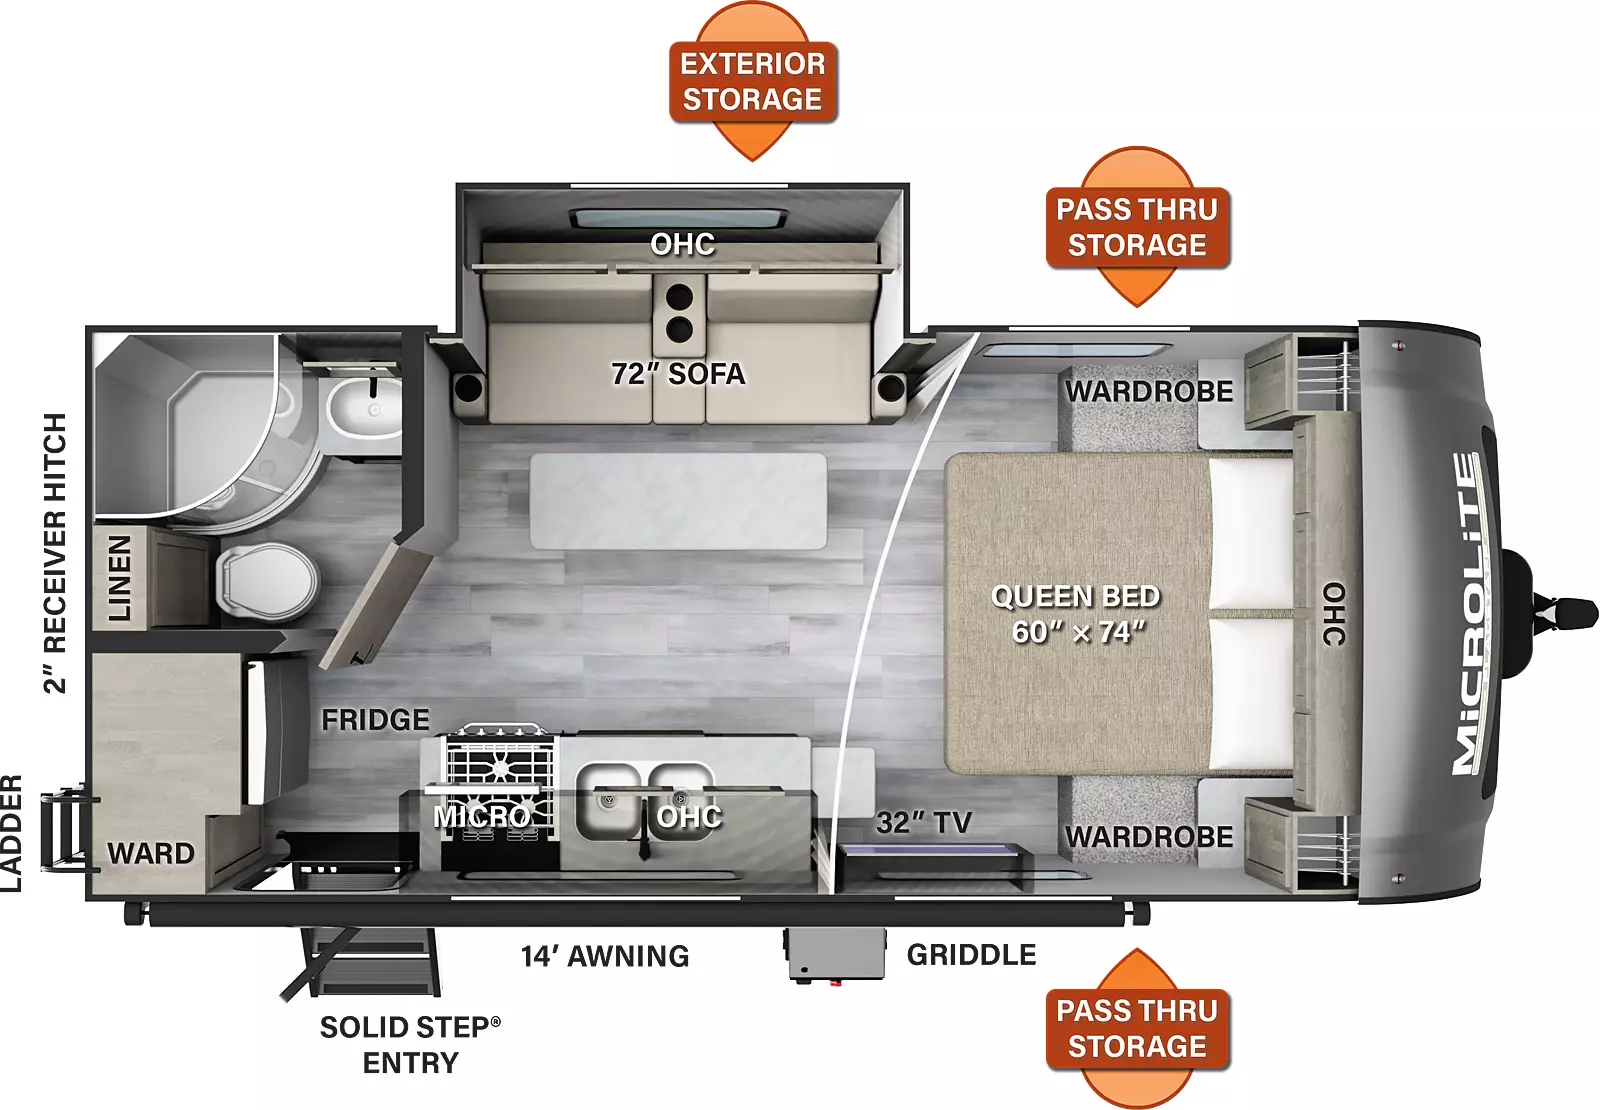 The 21FBRS has one slide out on the off-door side, along with one entry door. Exterior features include a 14 foot awning, front pass thru storage, griddle, off-door side exterior storage, rear ladder and 2 inch receiver hitch. Interior layout from front to back: front bedroom with 60 x 74 inch queen bed, overhead cabinets, and  wardrobes on either side; off-door side slide out containing a 72 inch sofa with table and overhead cabinets; kitchen living area with a double sink, stove, microwave, overhead cabinets and TV; half bathroom, refrigerator, and wardrobe in the rear. 